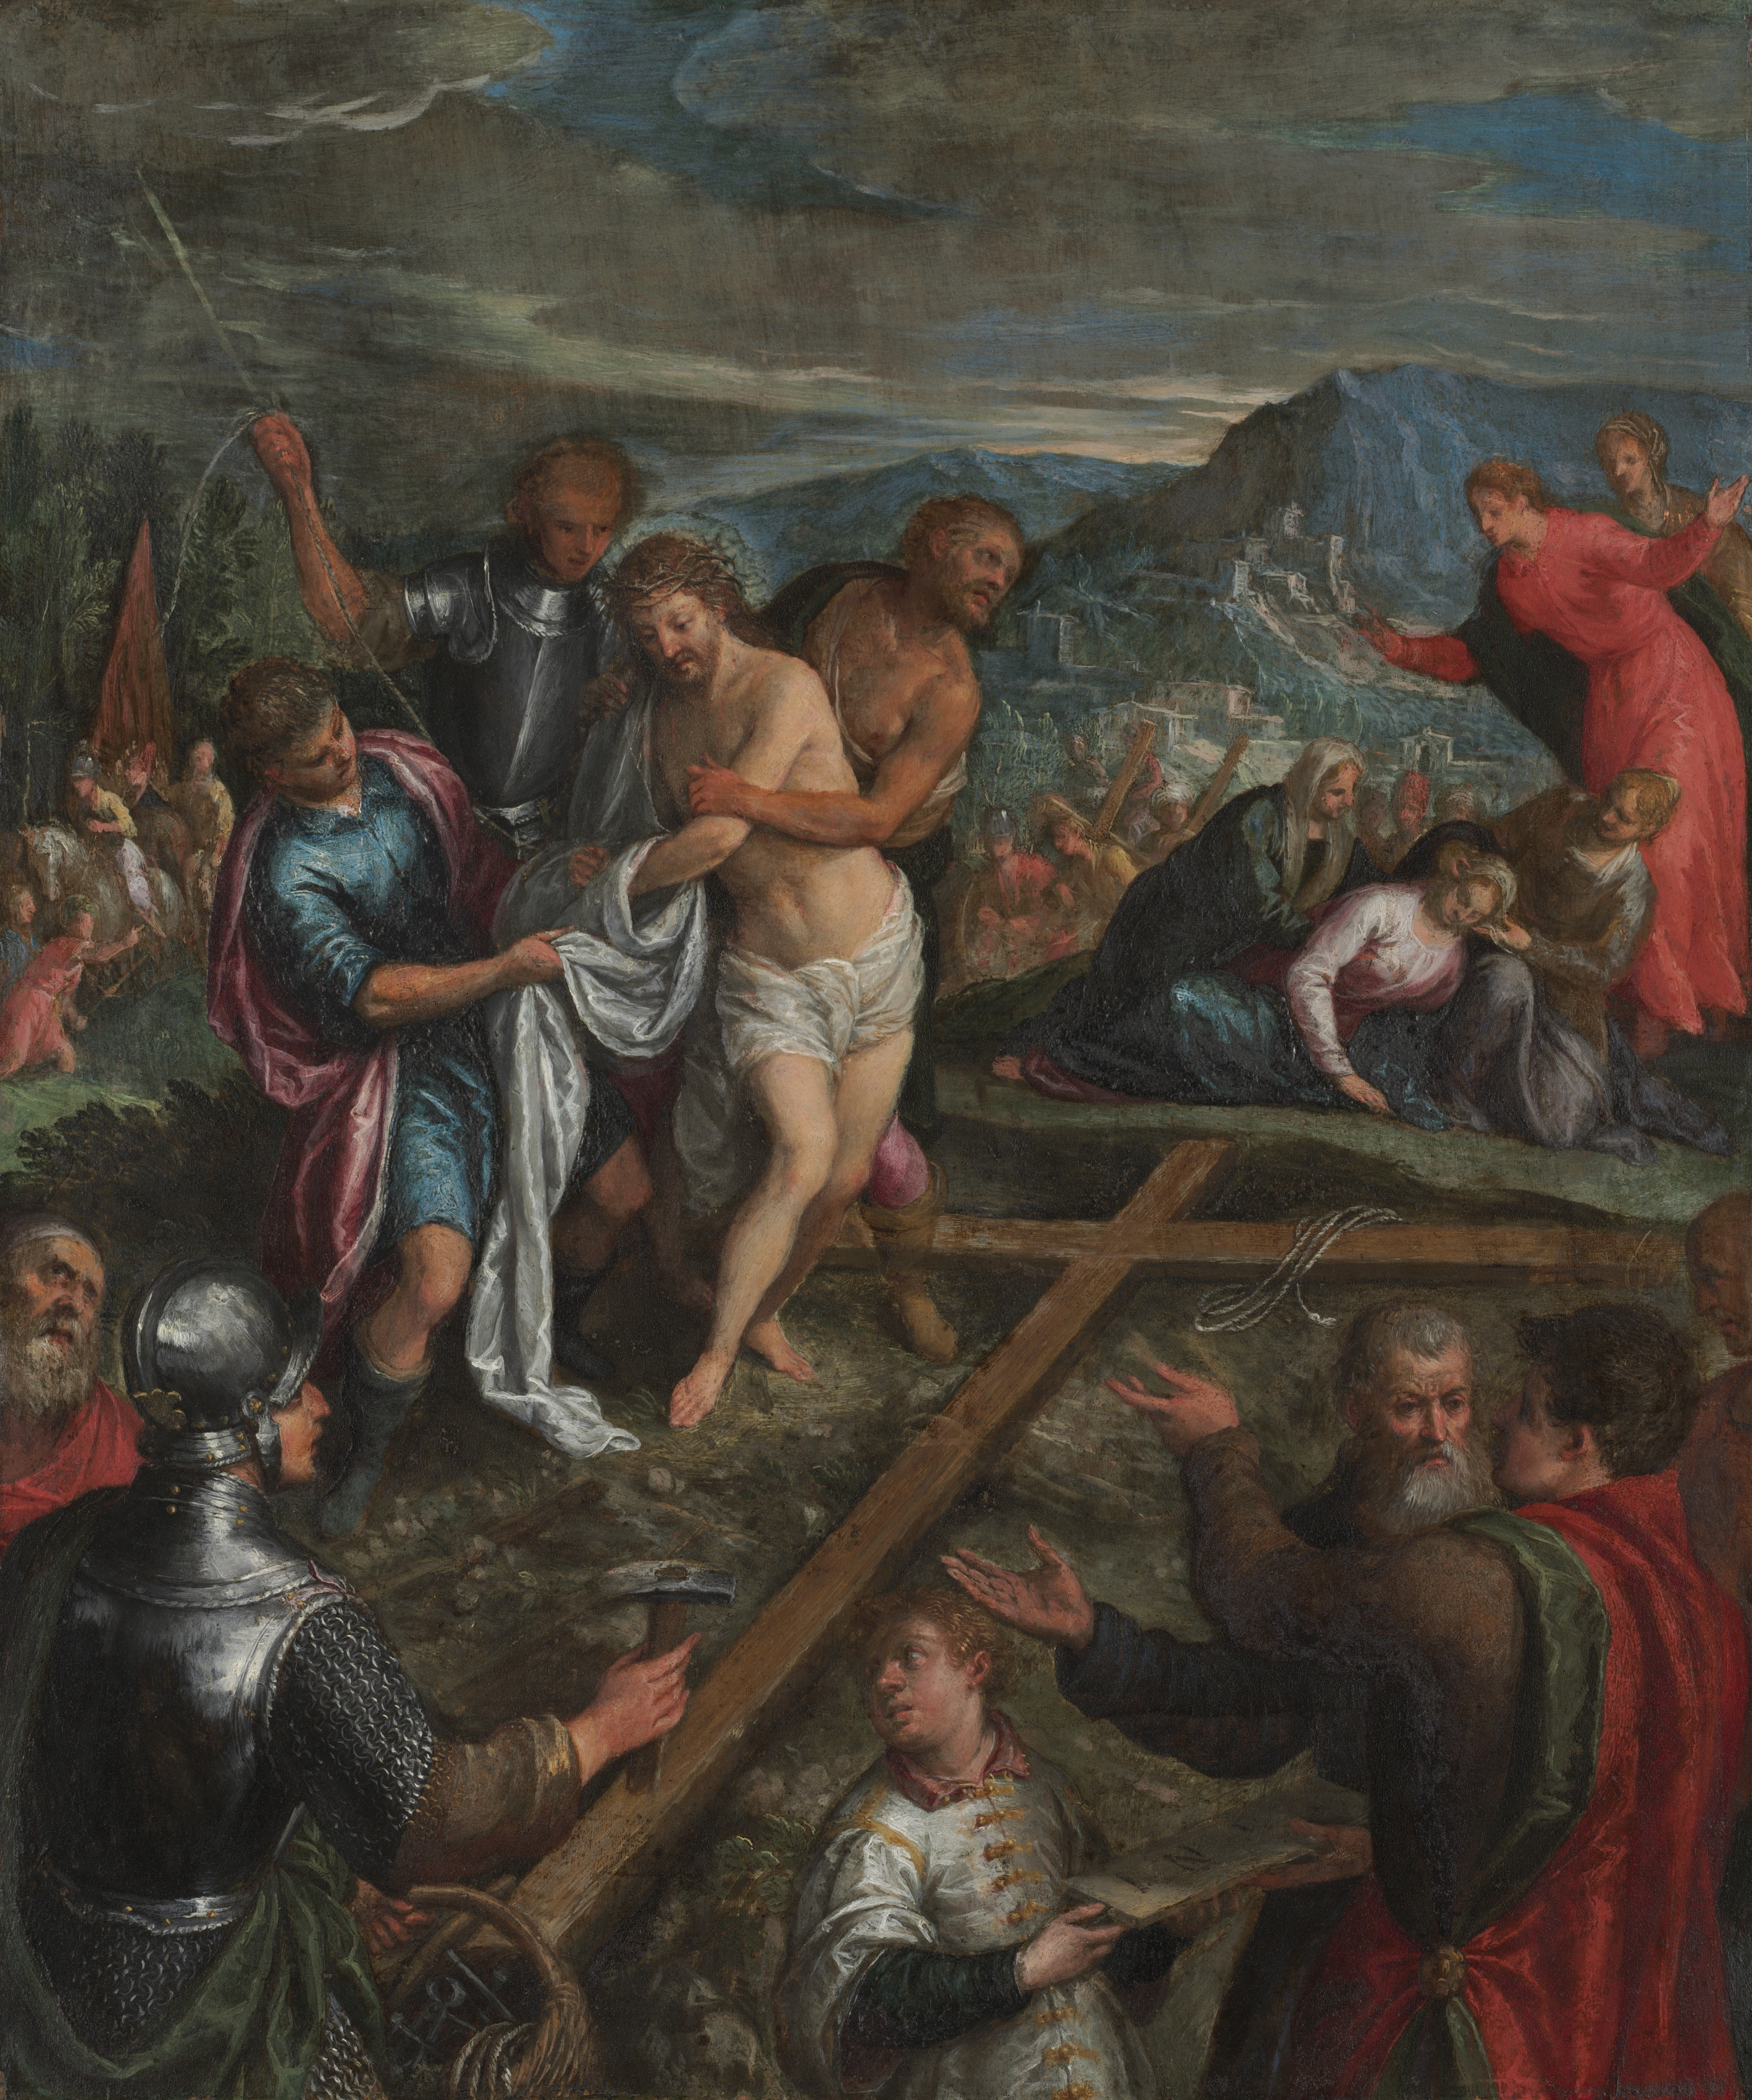 Preparation for the Crucifixion